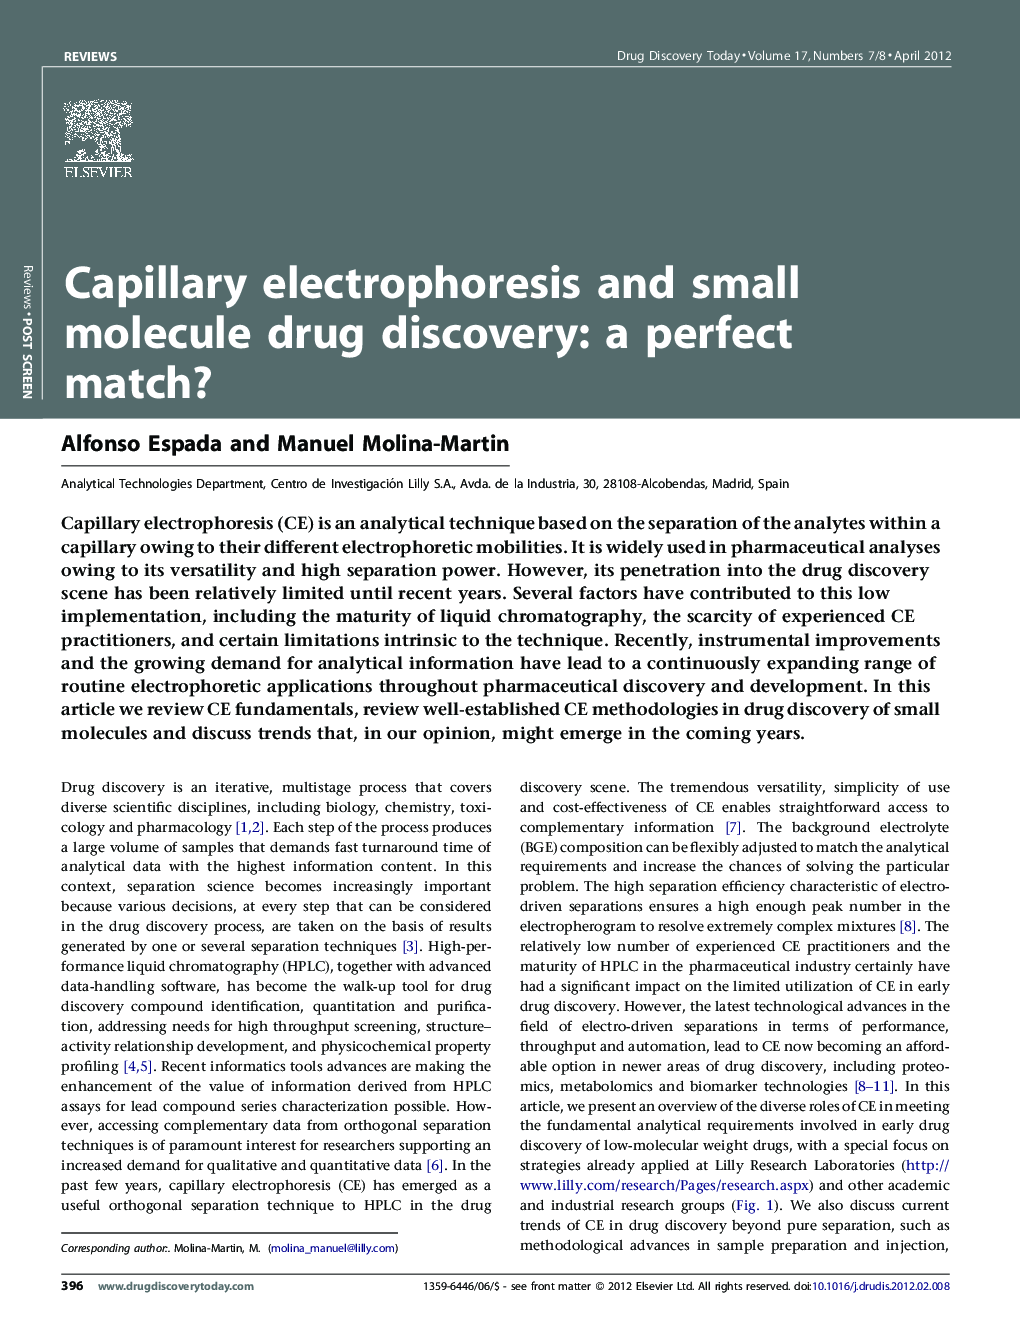 Capillary electrophoresis and small molecule drug discovery: a perfect match?